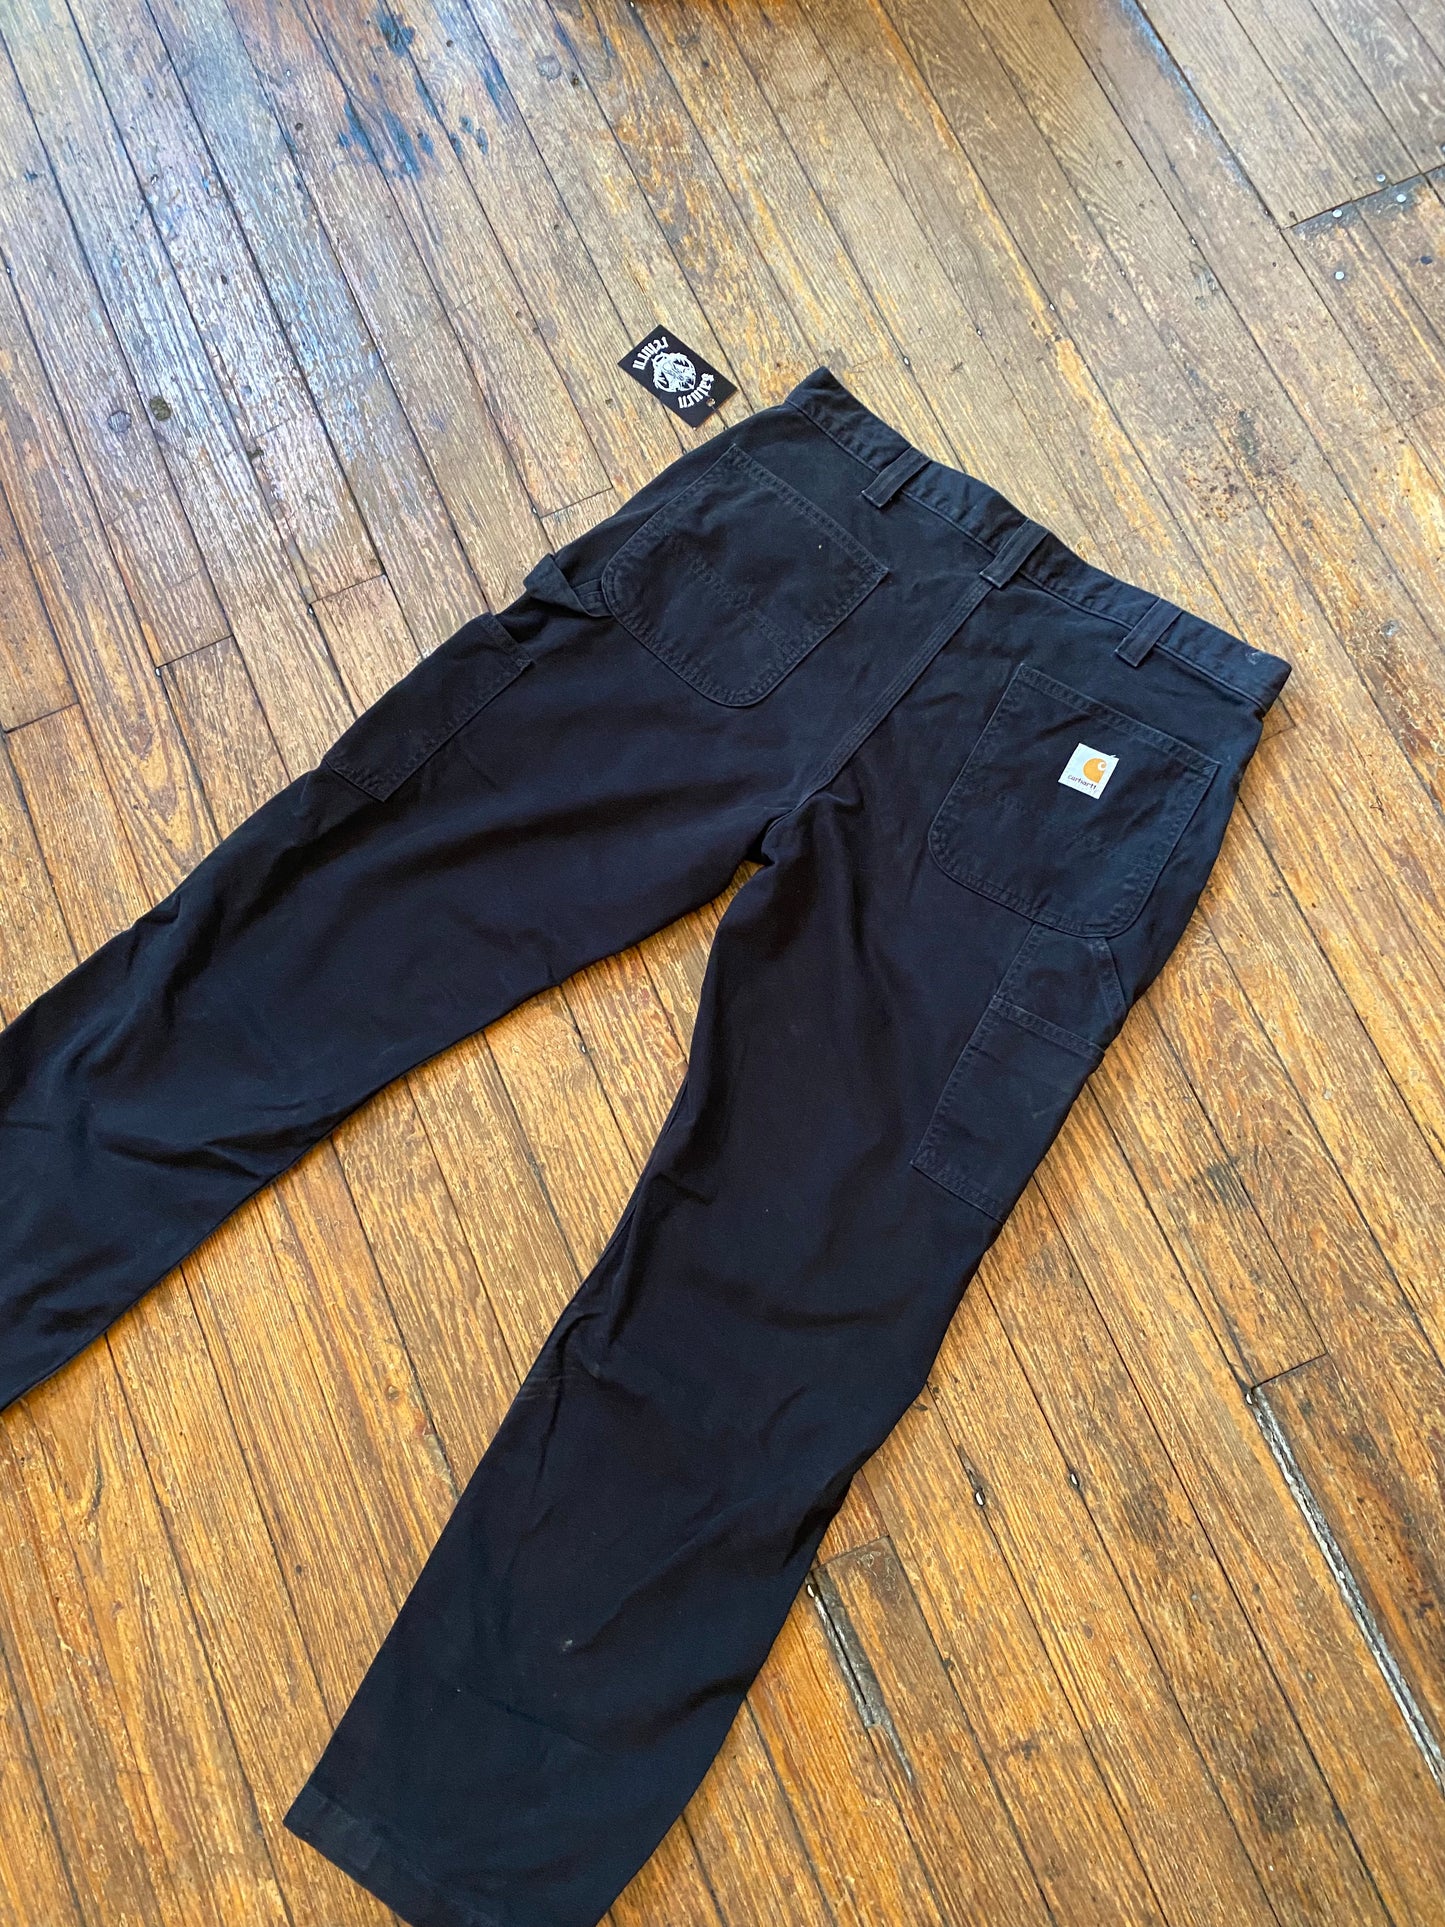 Carhartt Black Relaxed Fit Twill Utility Work Pant